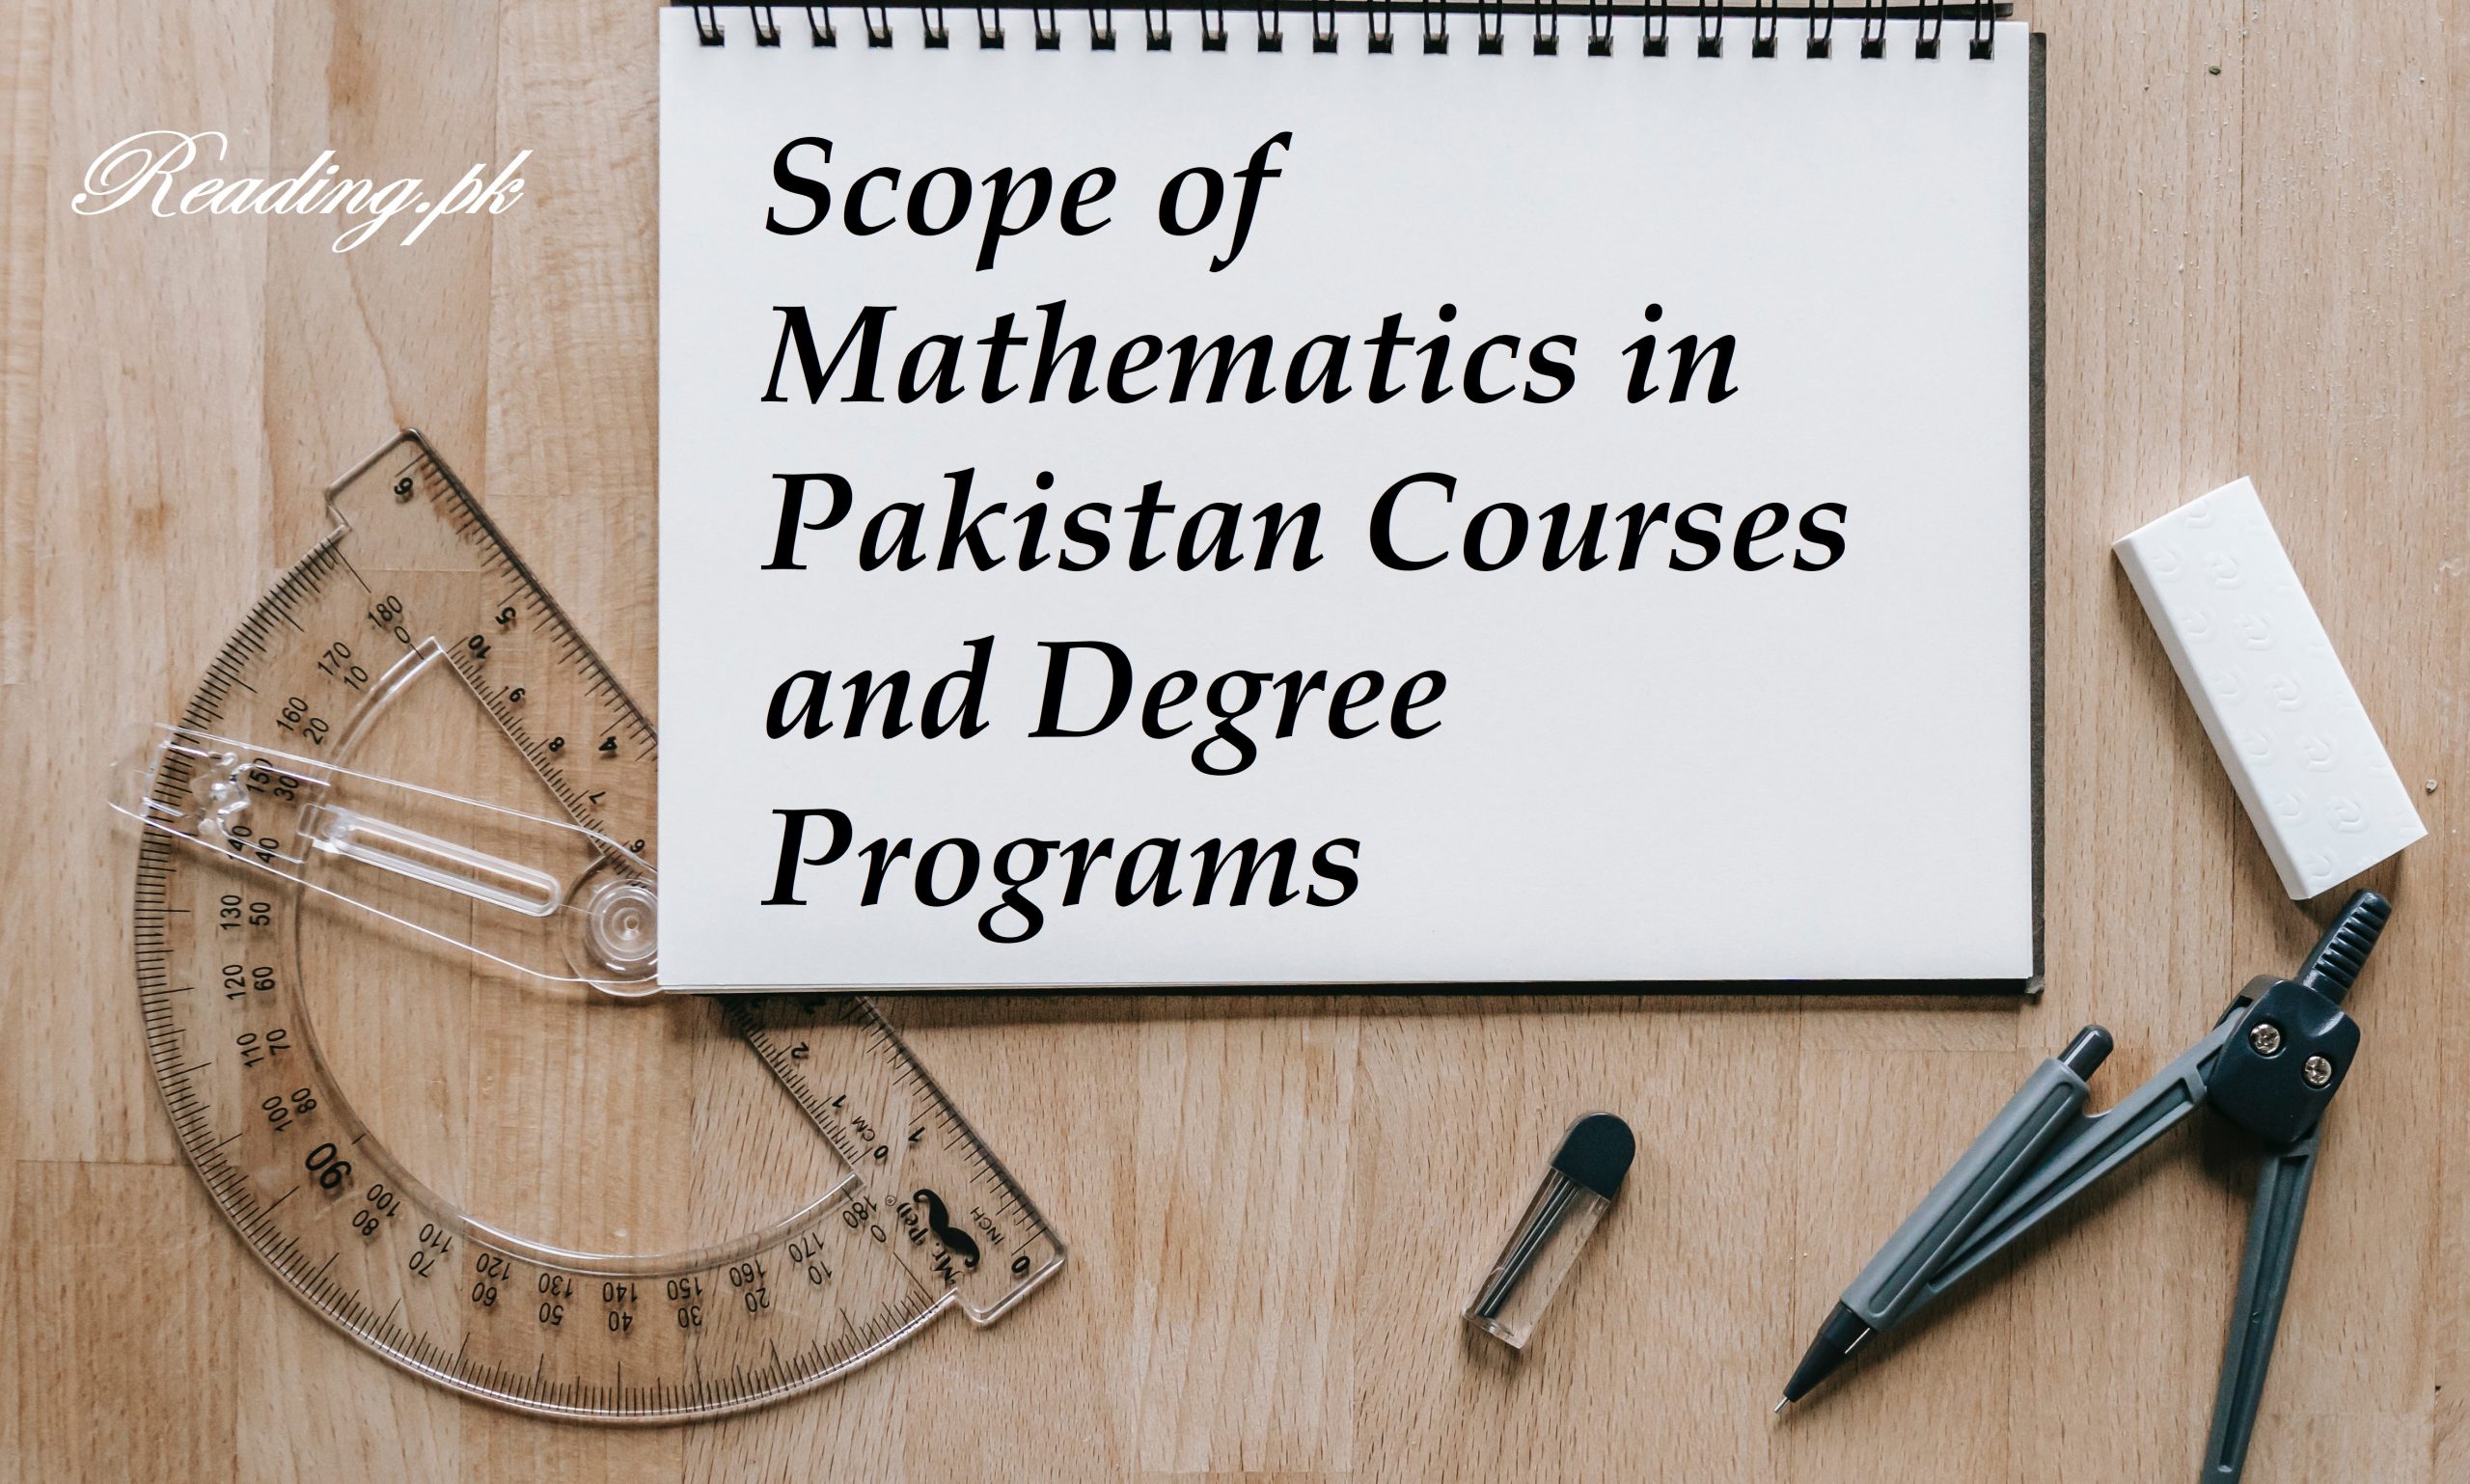 Scope of Mathematics in Pakistan Courses and Degree Programs